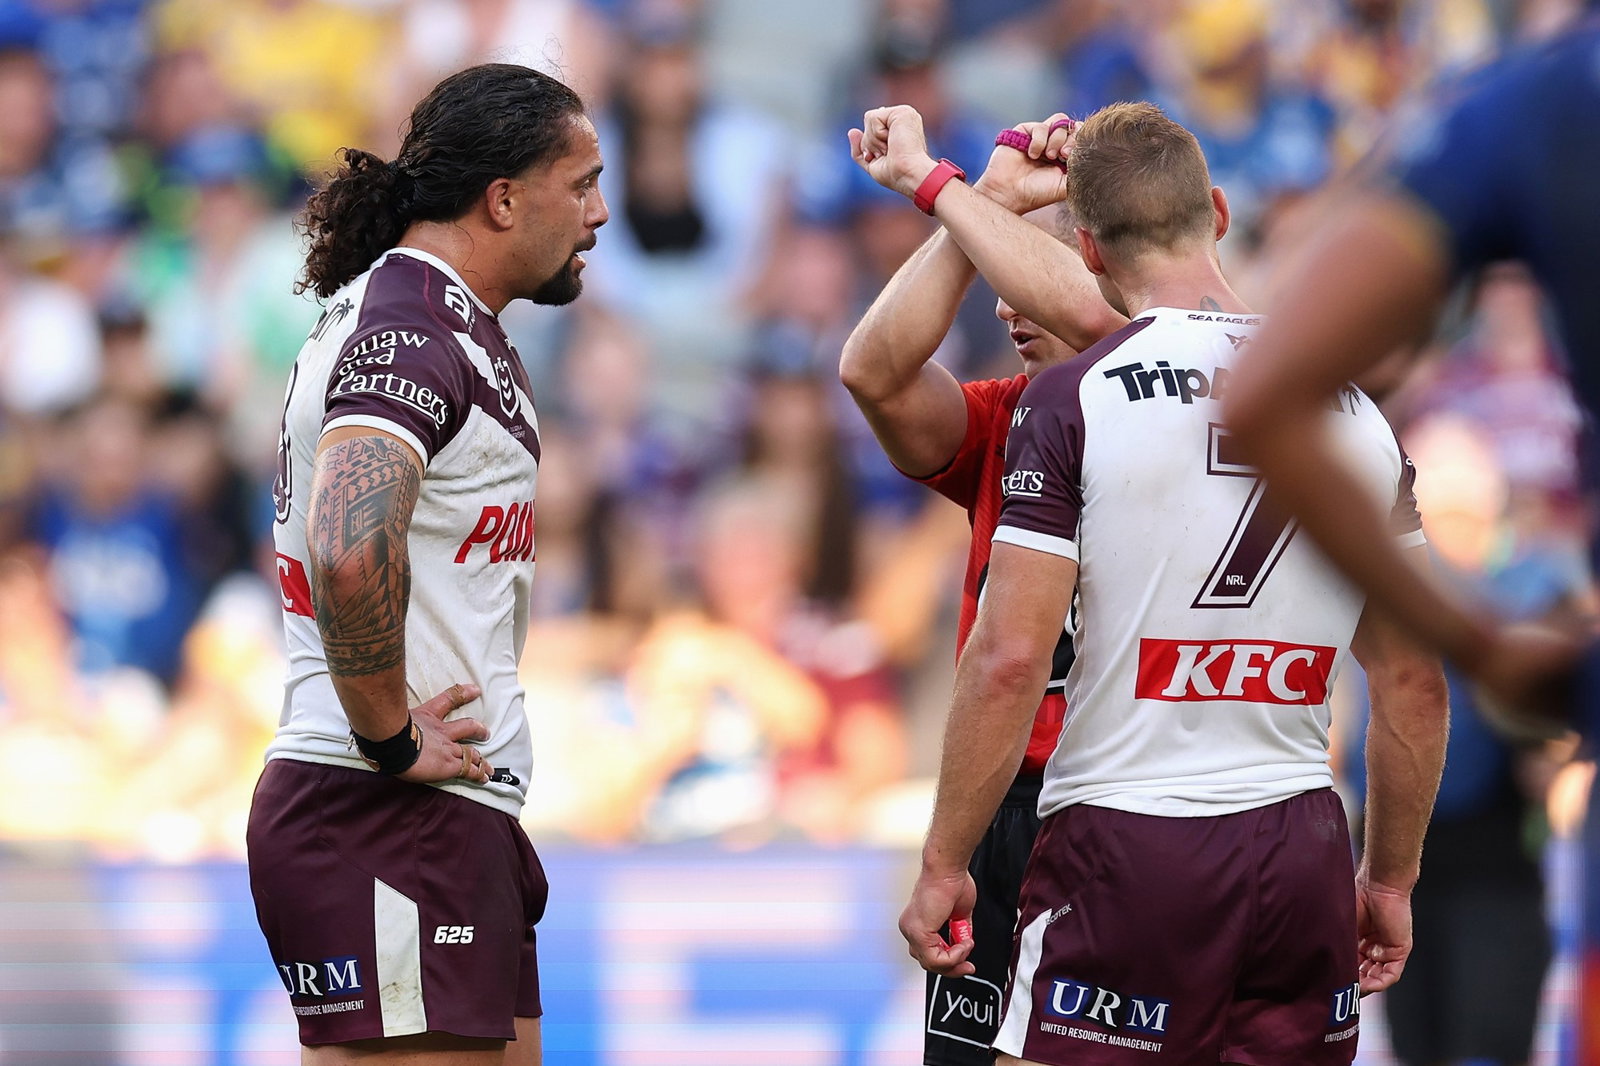 An NRL referee crosses his arms to put Manly Sea Eagles player Josh Aloiai on report. Daly Cherry-Evans is there too.